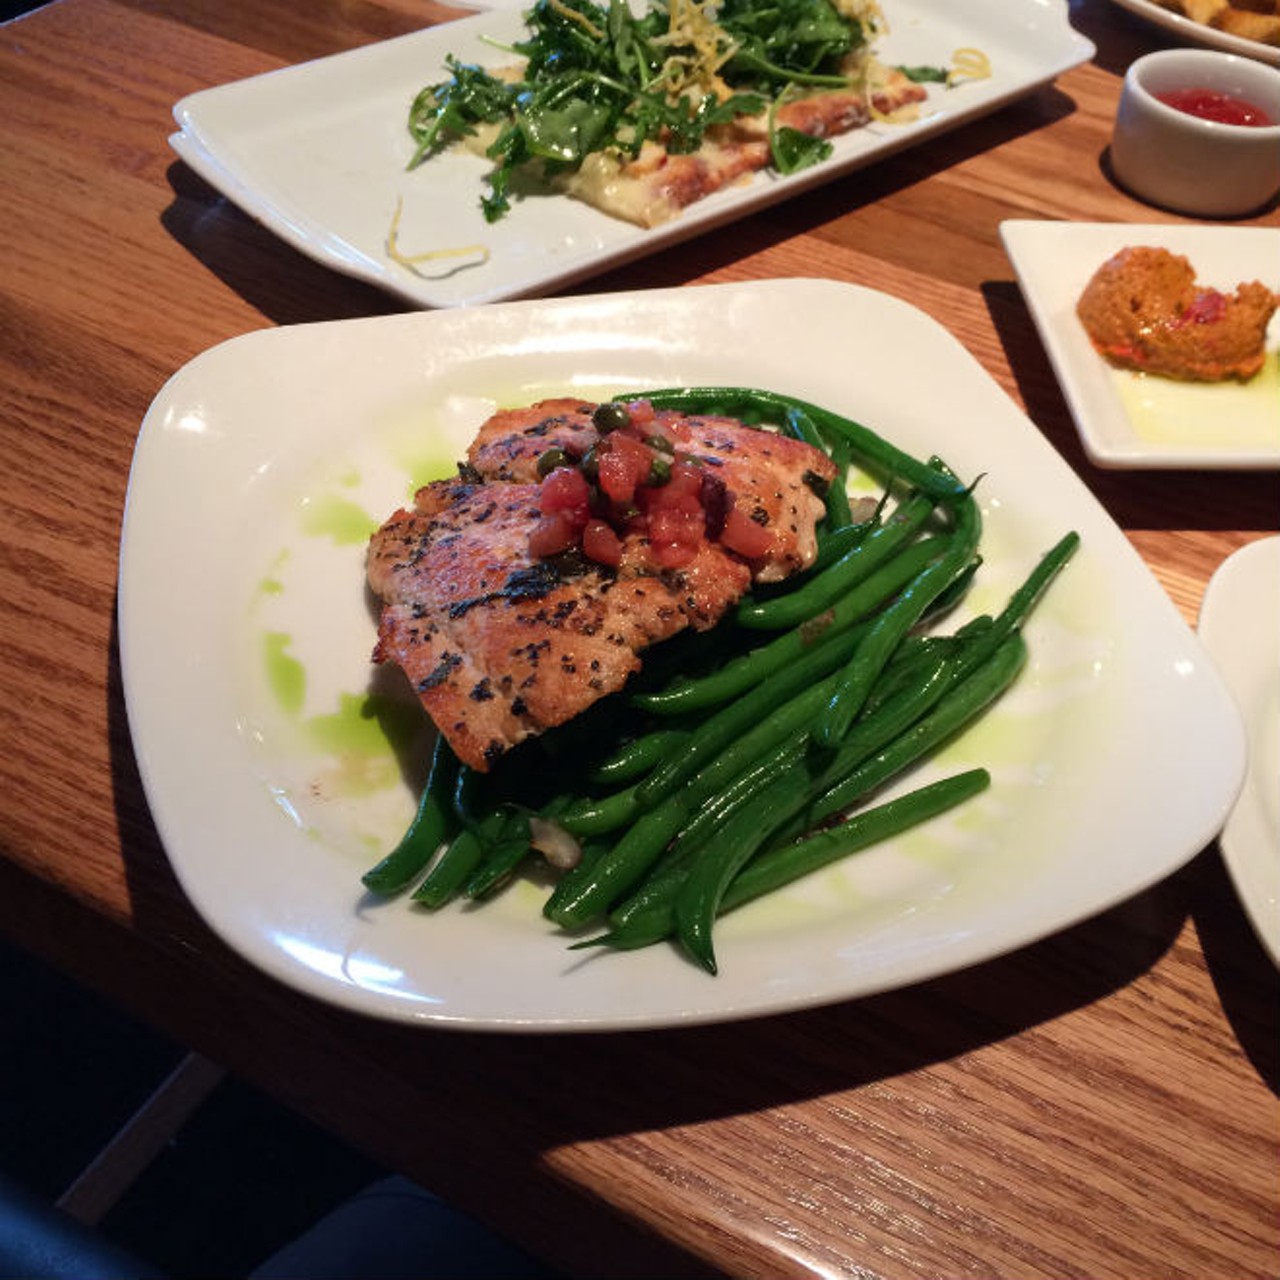 Grilled salmon with haricots verts at Carmel Caf&eacute;